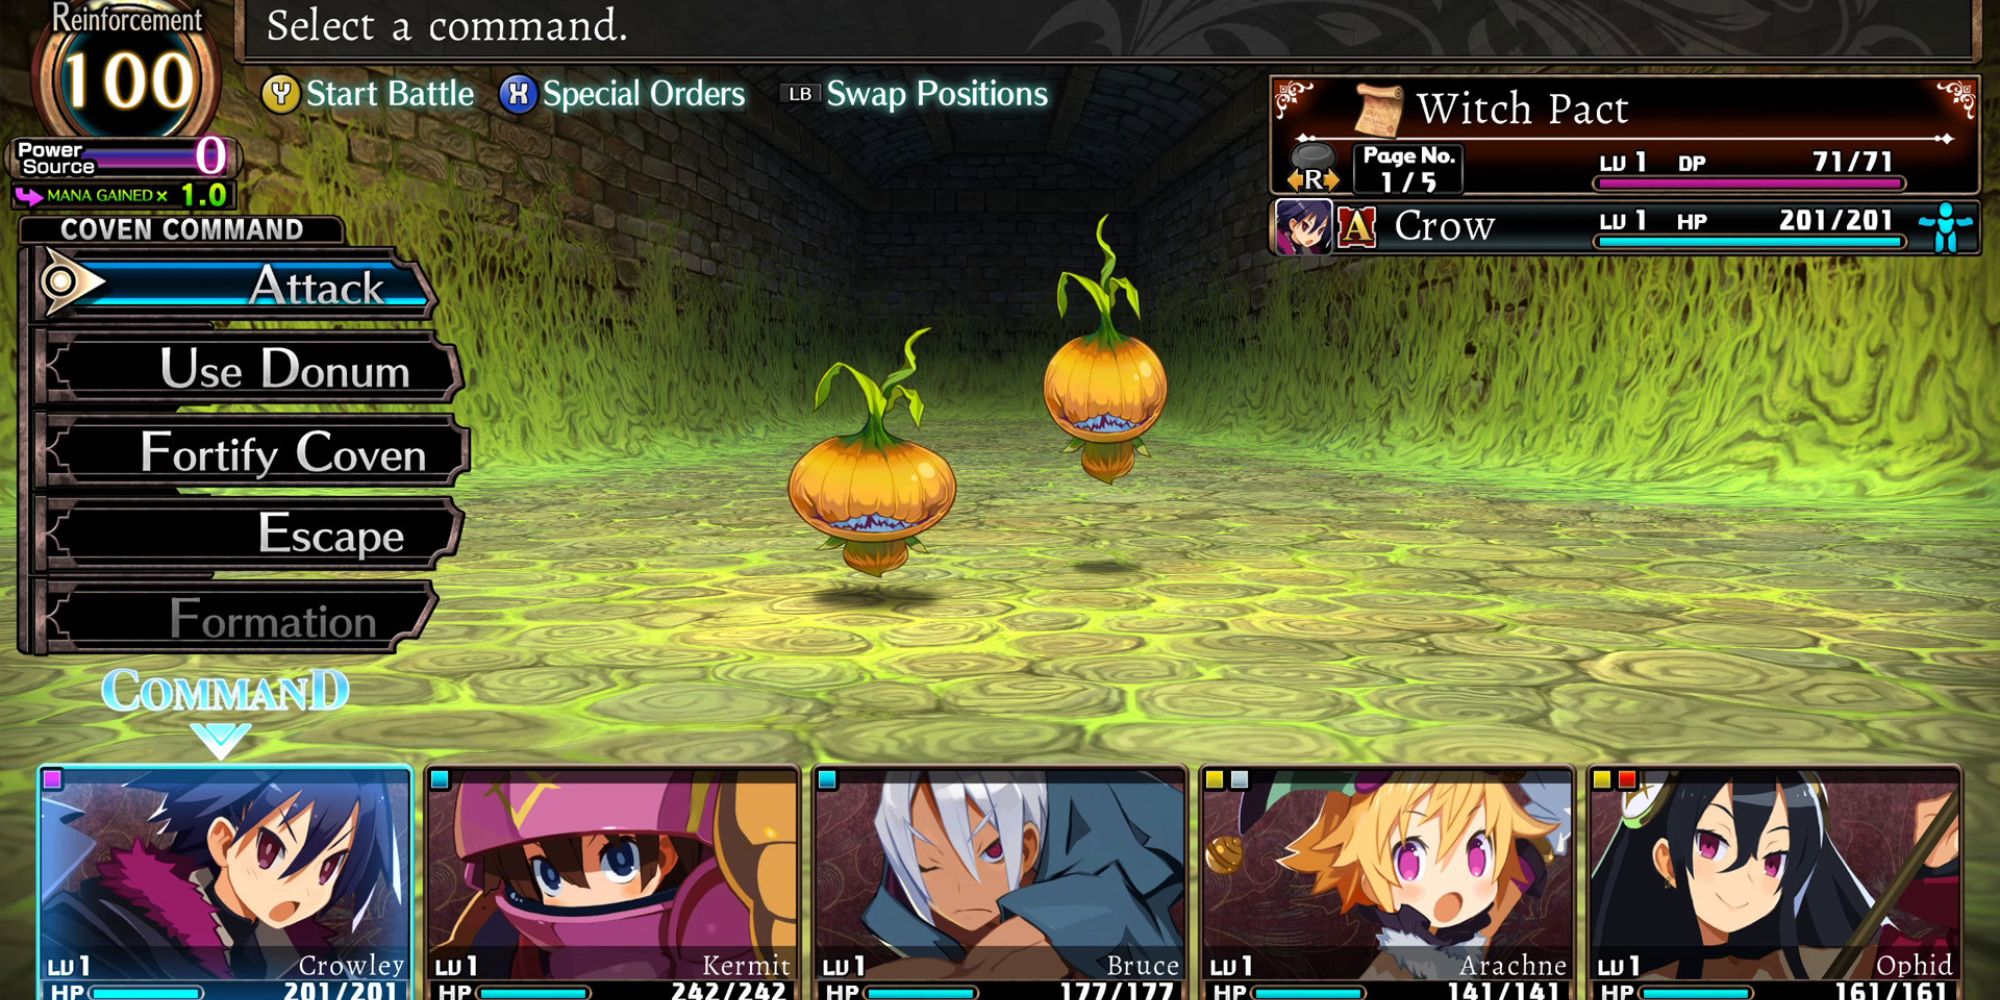 A party facing living onions in Labyrinth of Refrain: Coven of Dusk